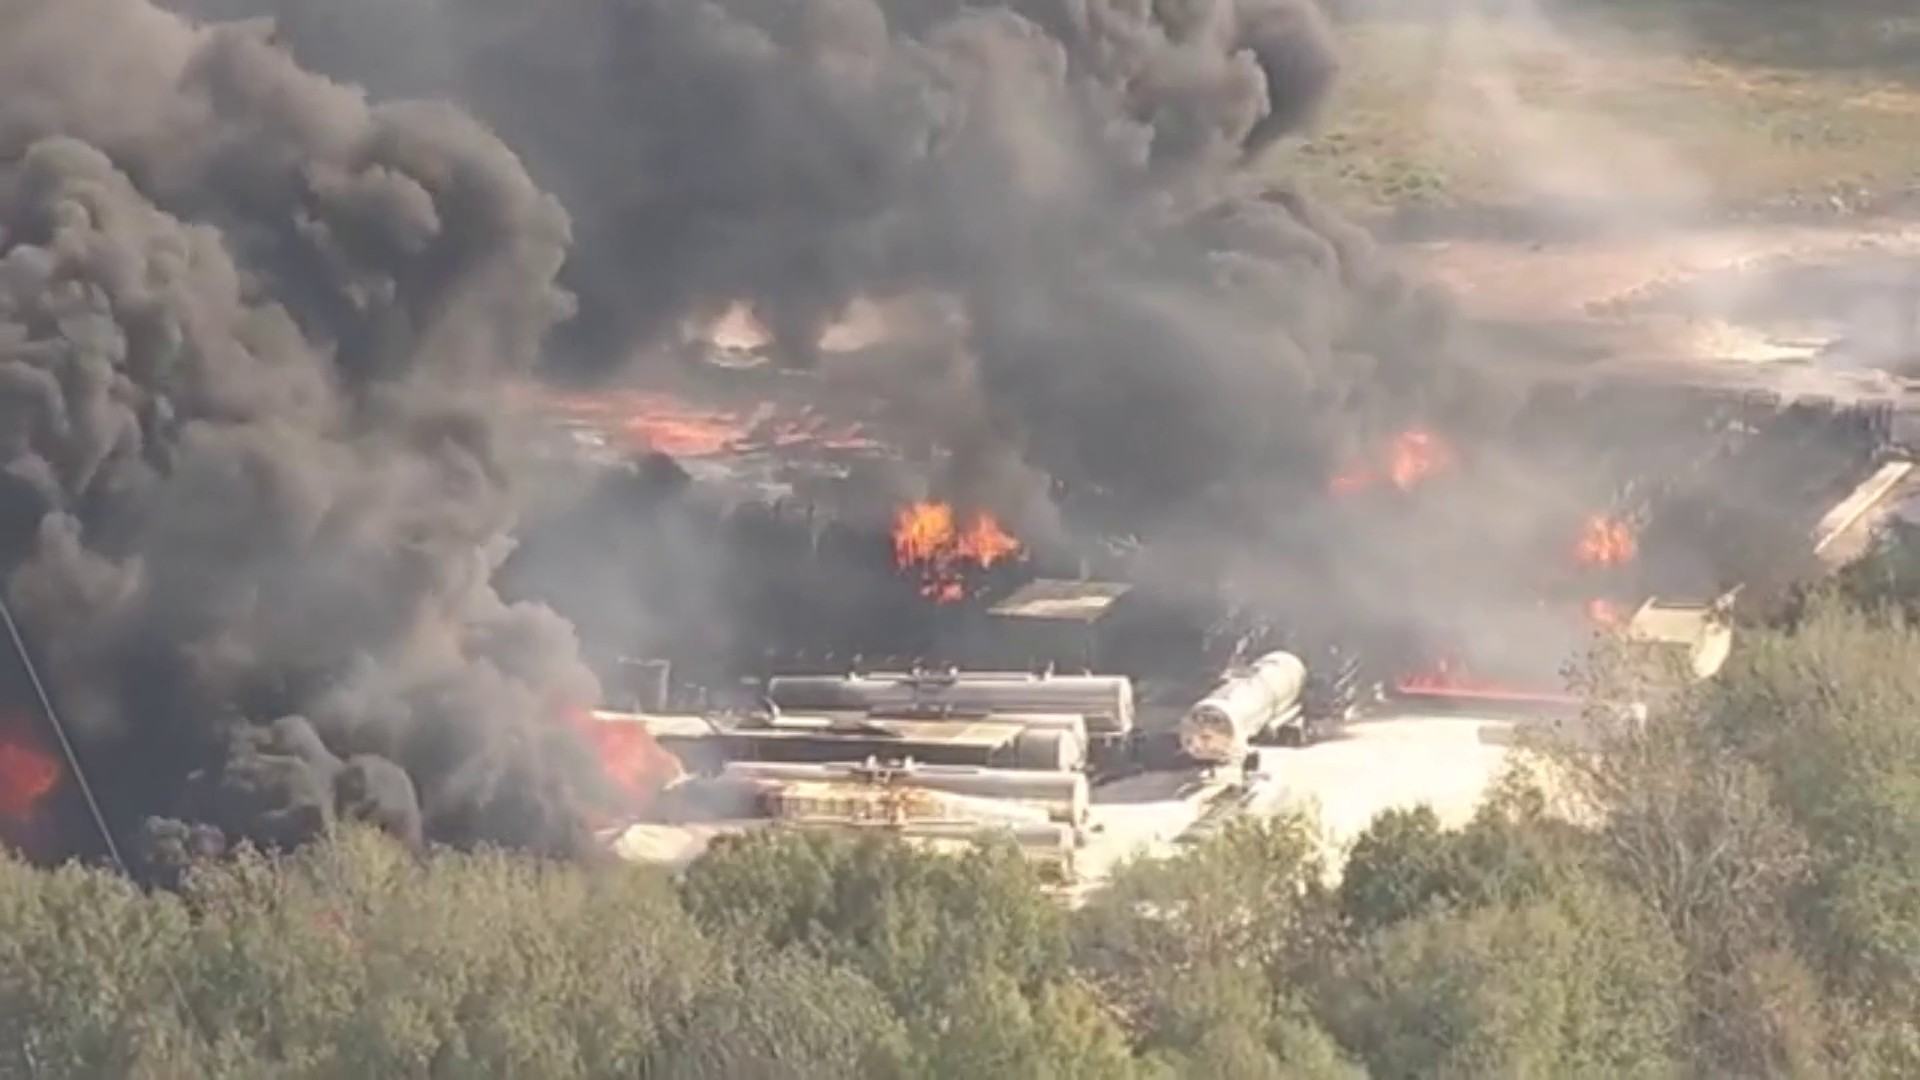 Latest Chemical Plant Fire Unnerves, Infuriates Houston-Area Residents -  Public Health Watch